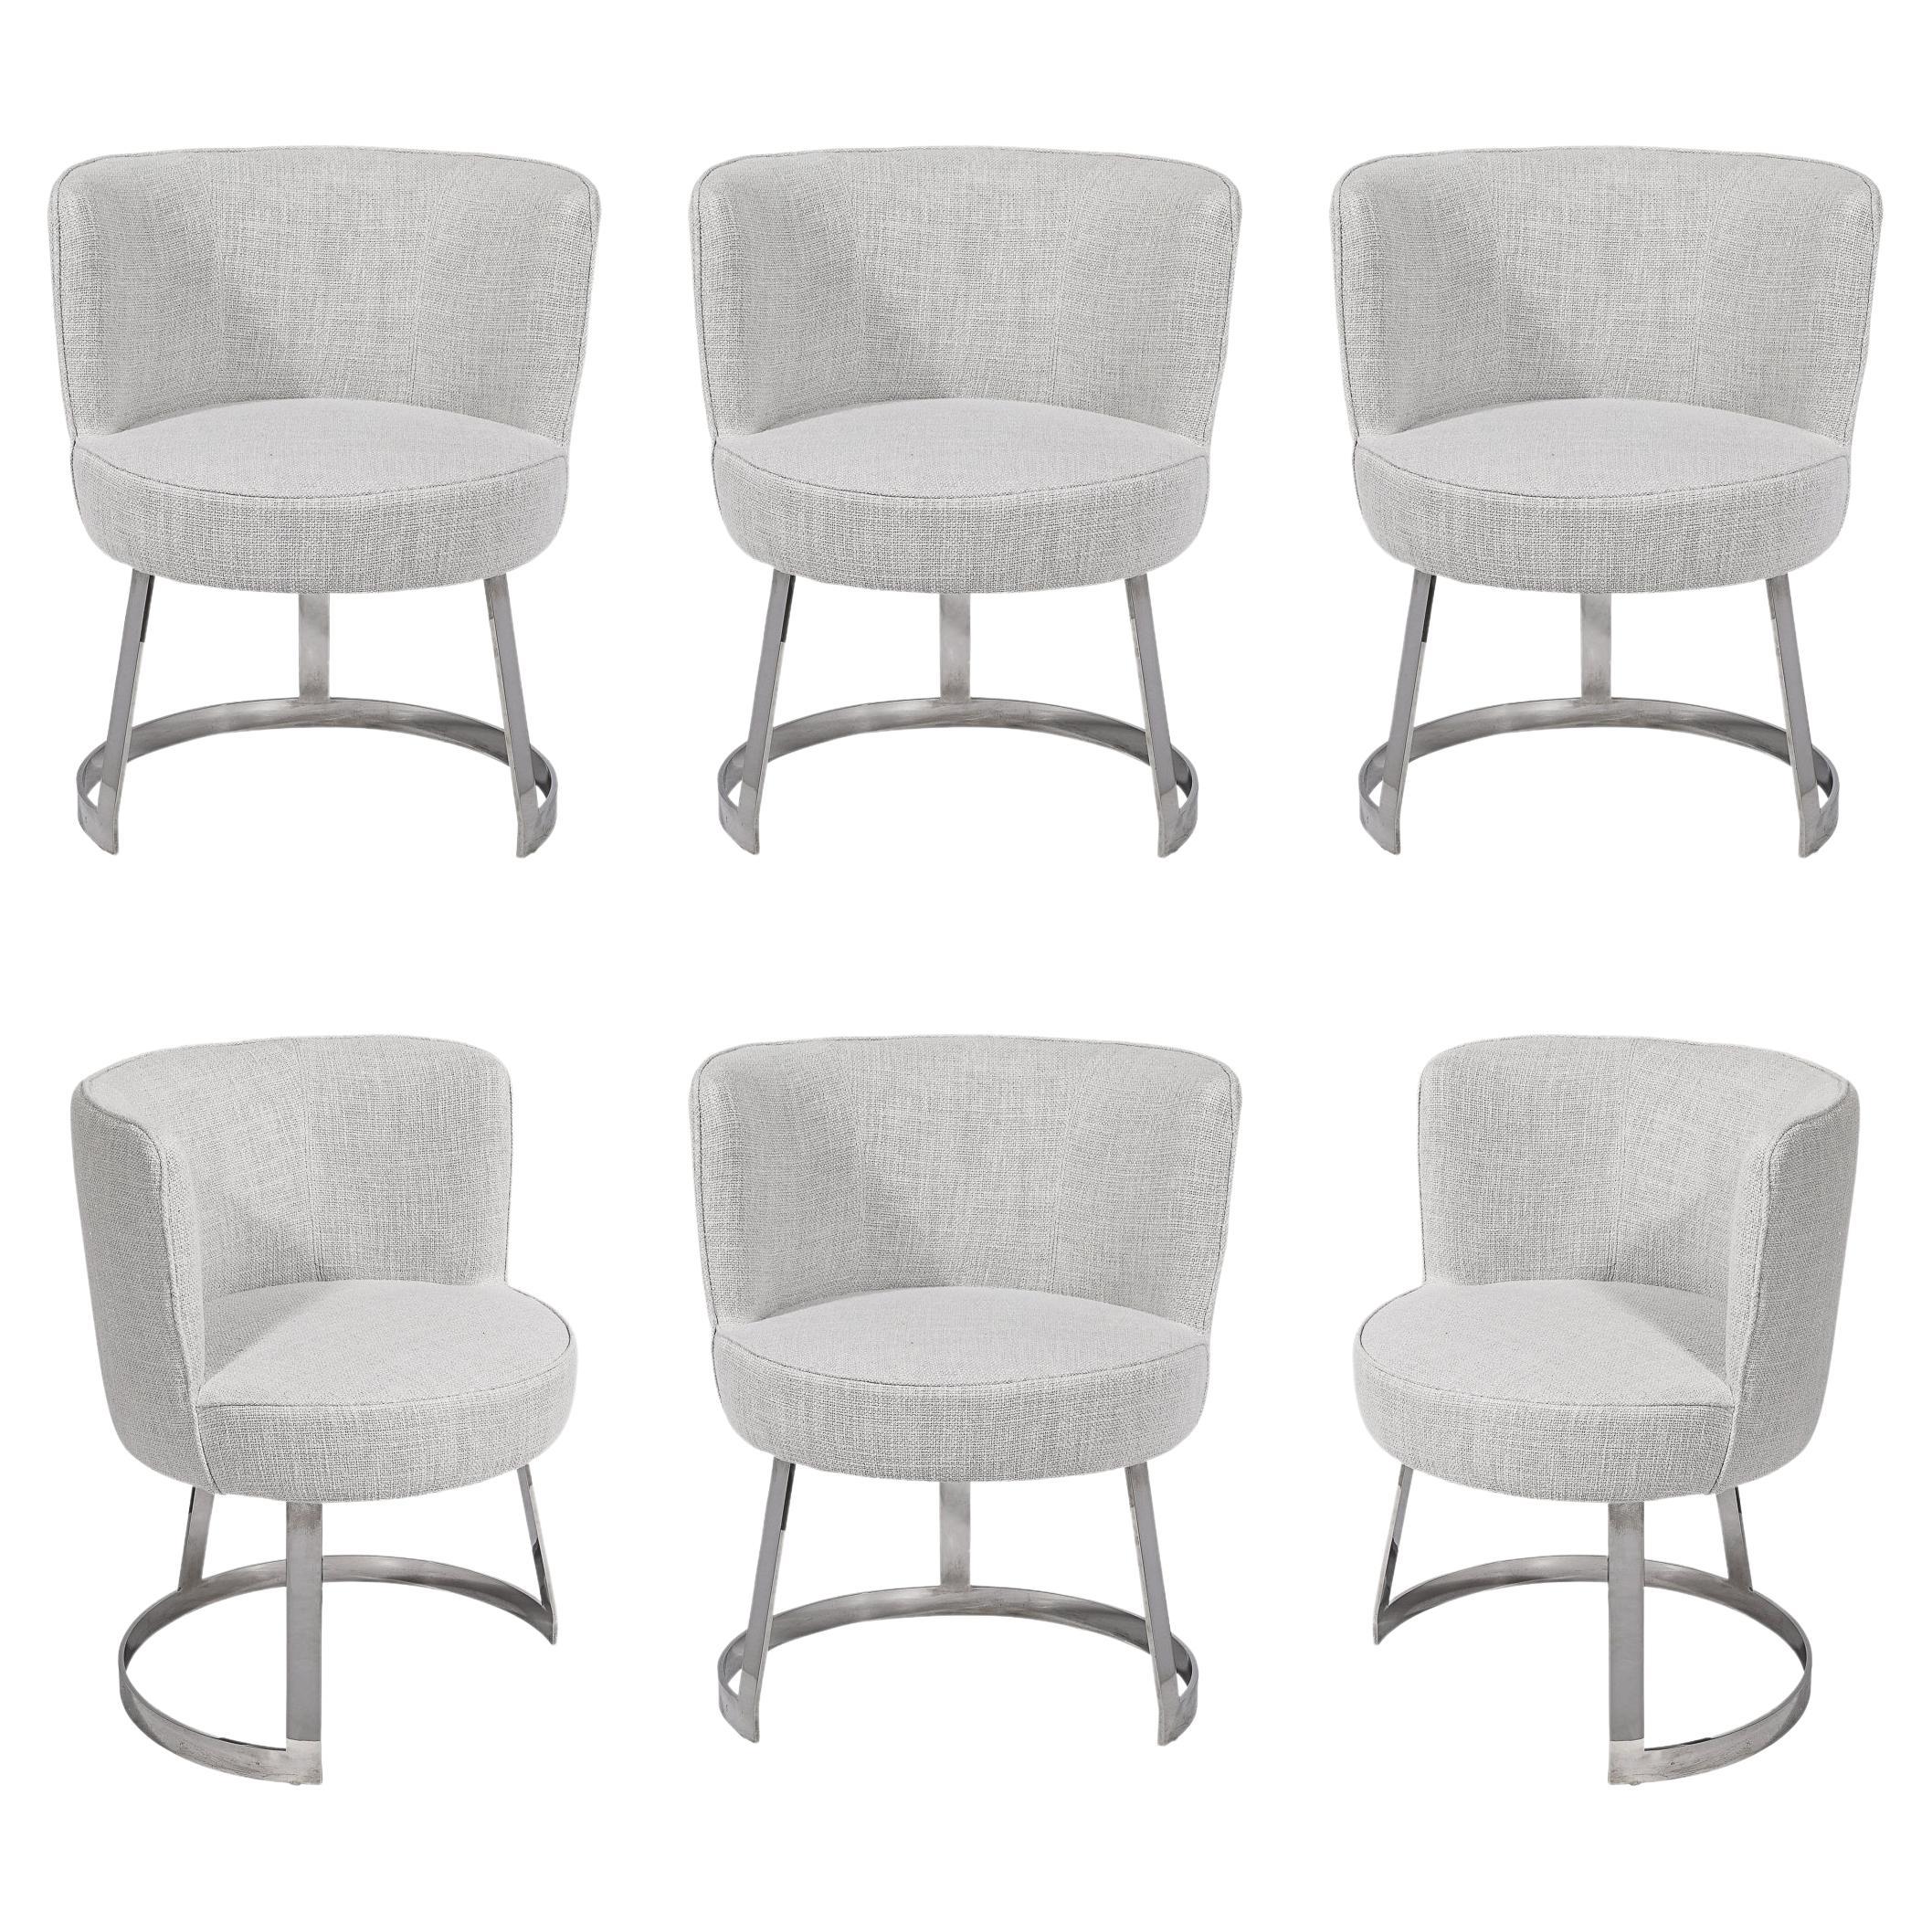 Set of 6 MidCentury Barrel Form Chrome Banded Dining Chairs in Holly Hunt Fabric